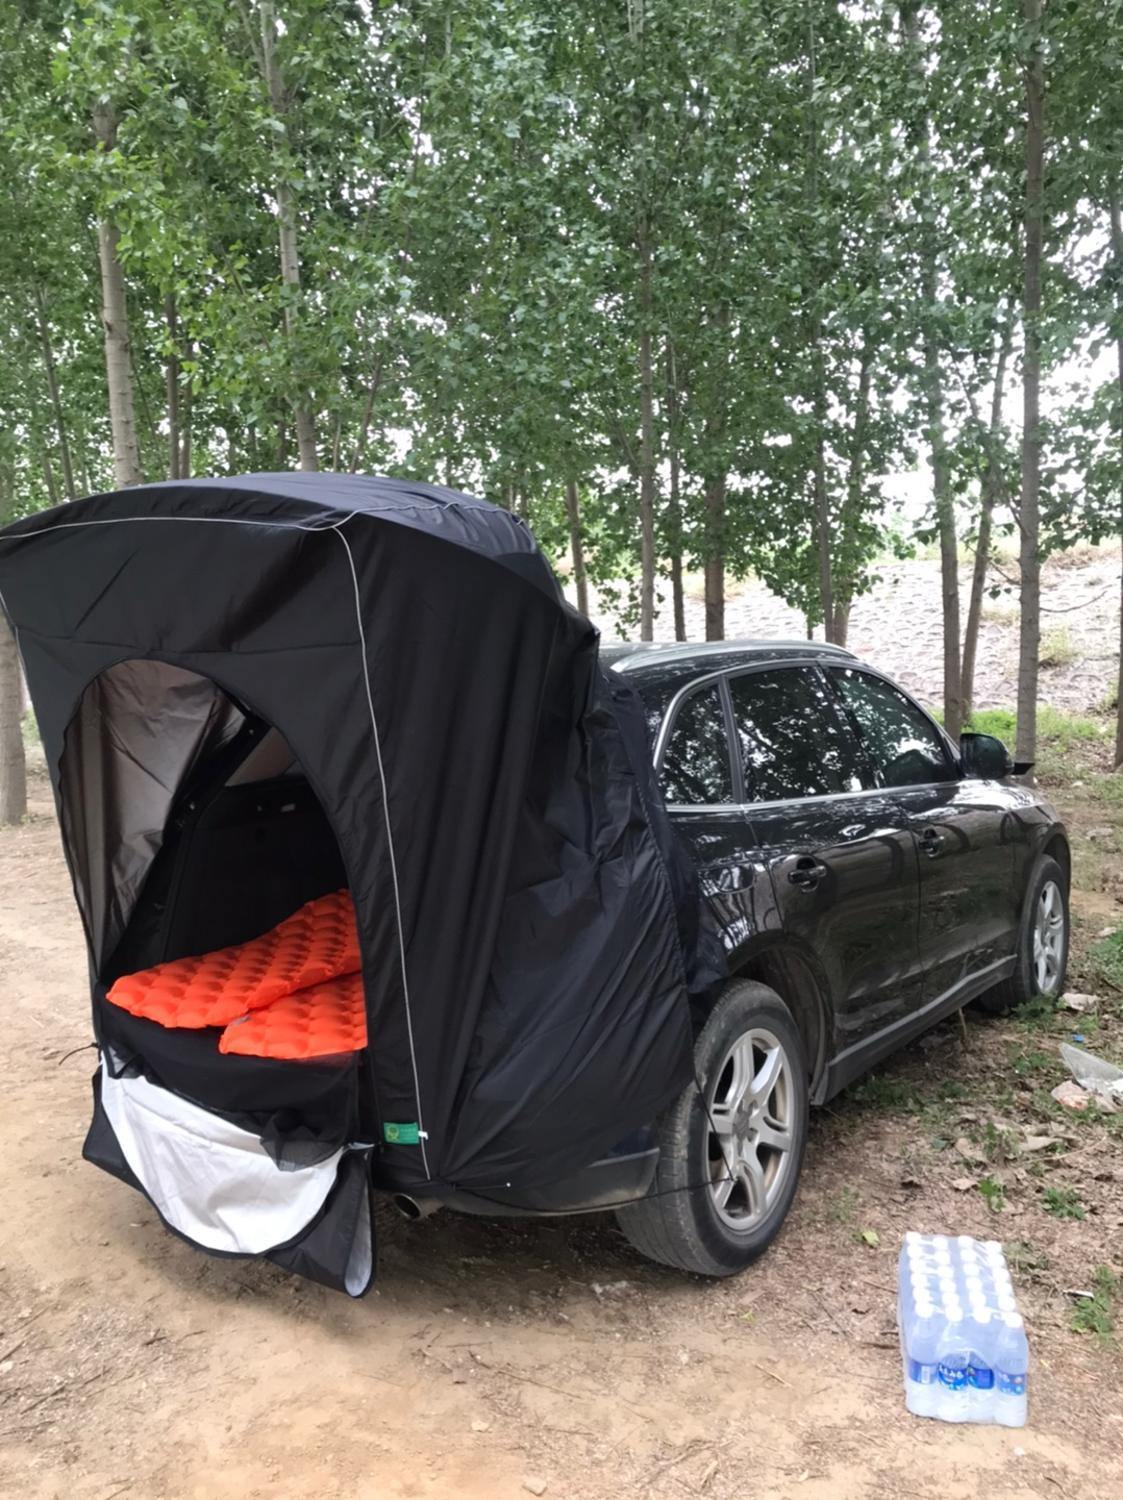 http://www.smartsalesaustralia.com.au/cdn/shop/products/image-of-canopy-tail-ledger-car-tent-with-picnic-awning-for-camping-from-smart-sales-australia-1.jpg?v=1672937211